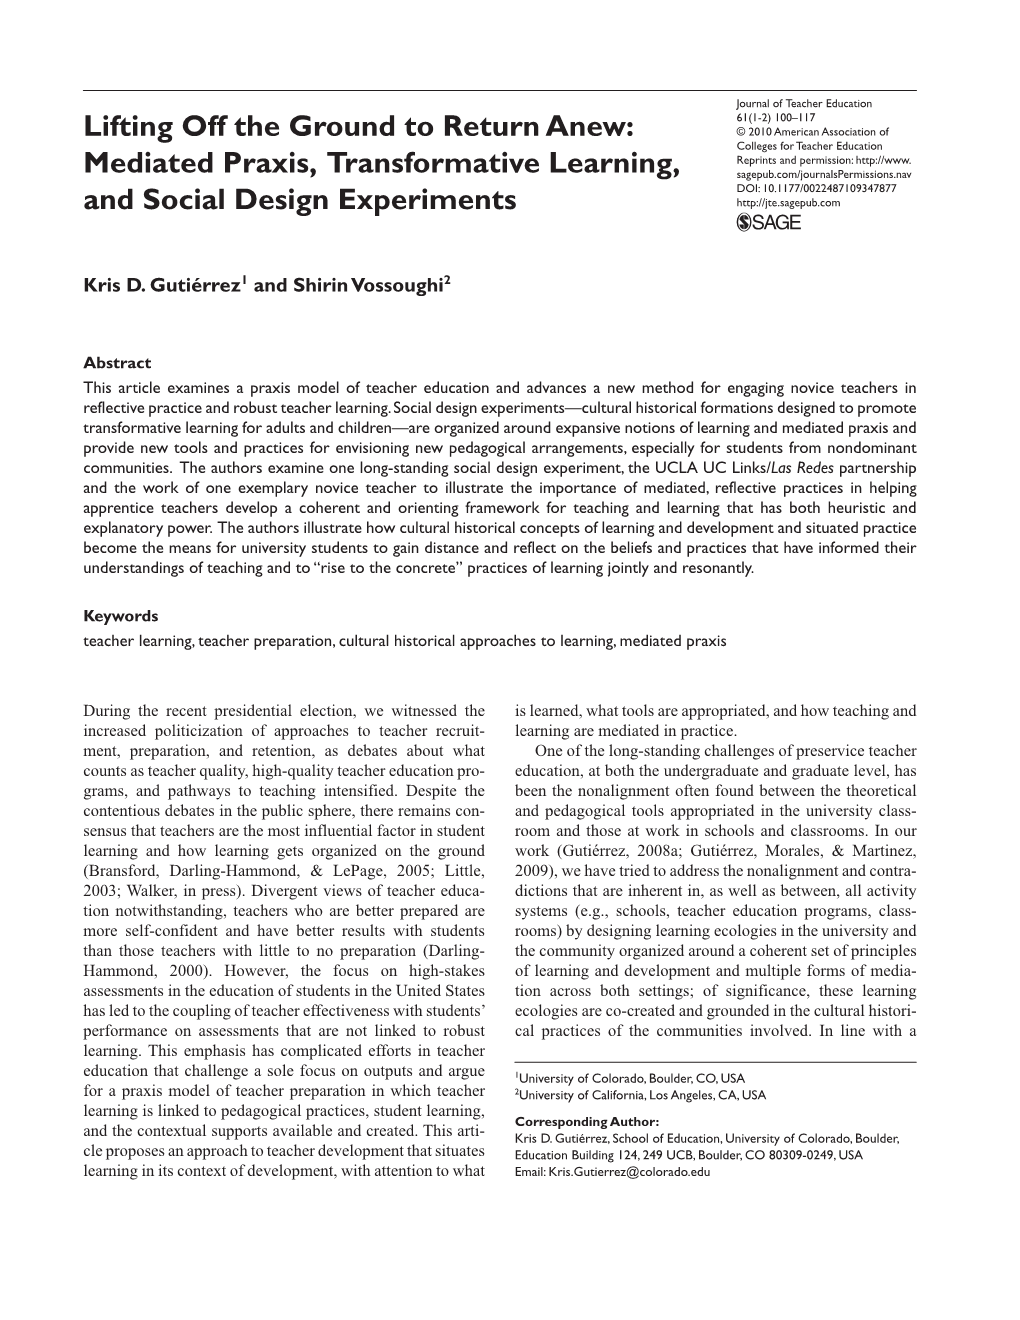 Mediated Praxis, Transformative Learning, and Social Design Experiments